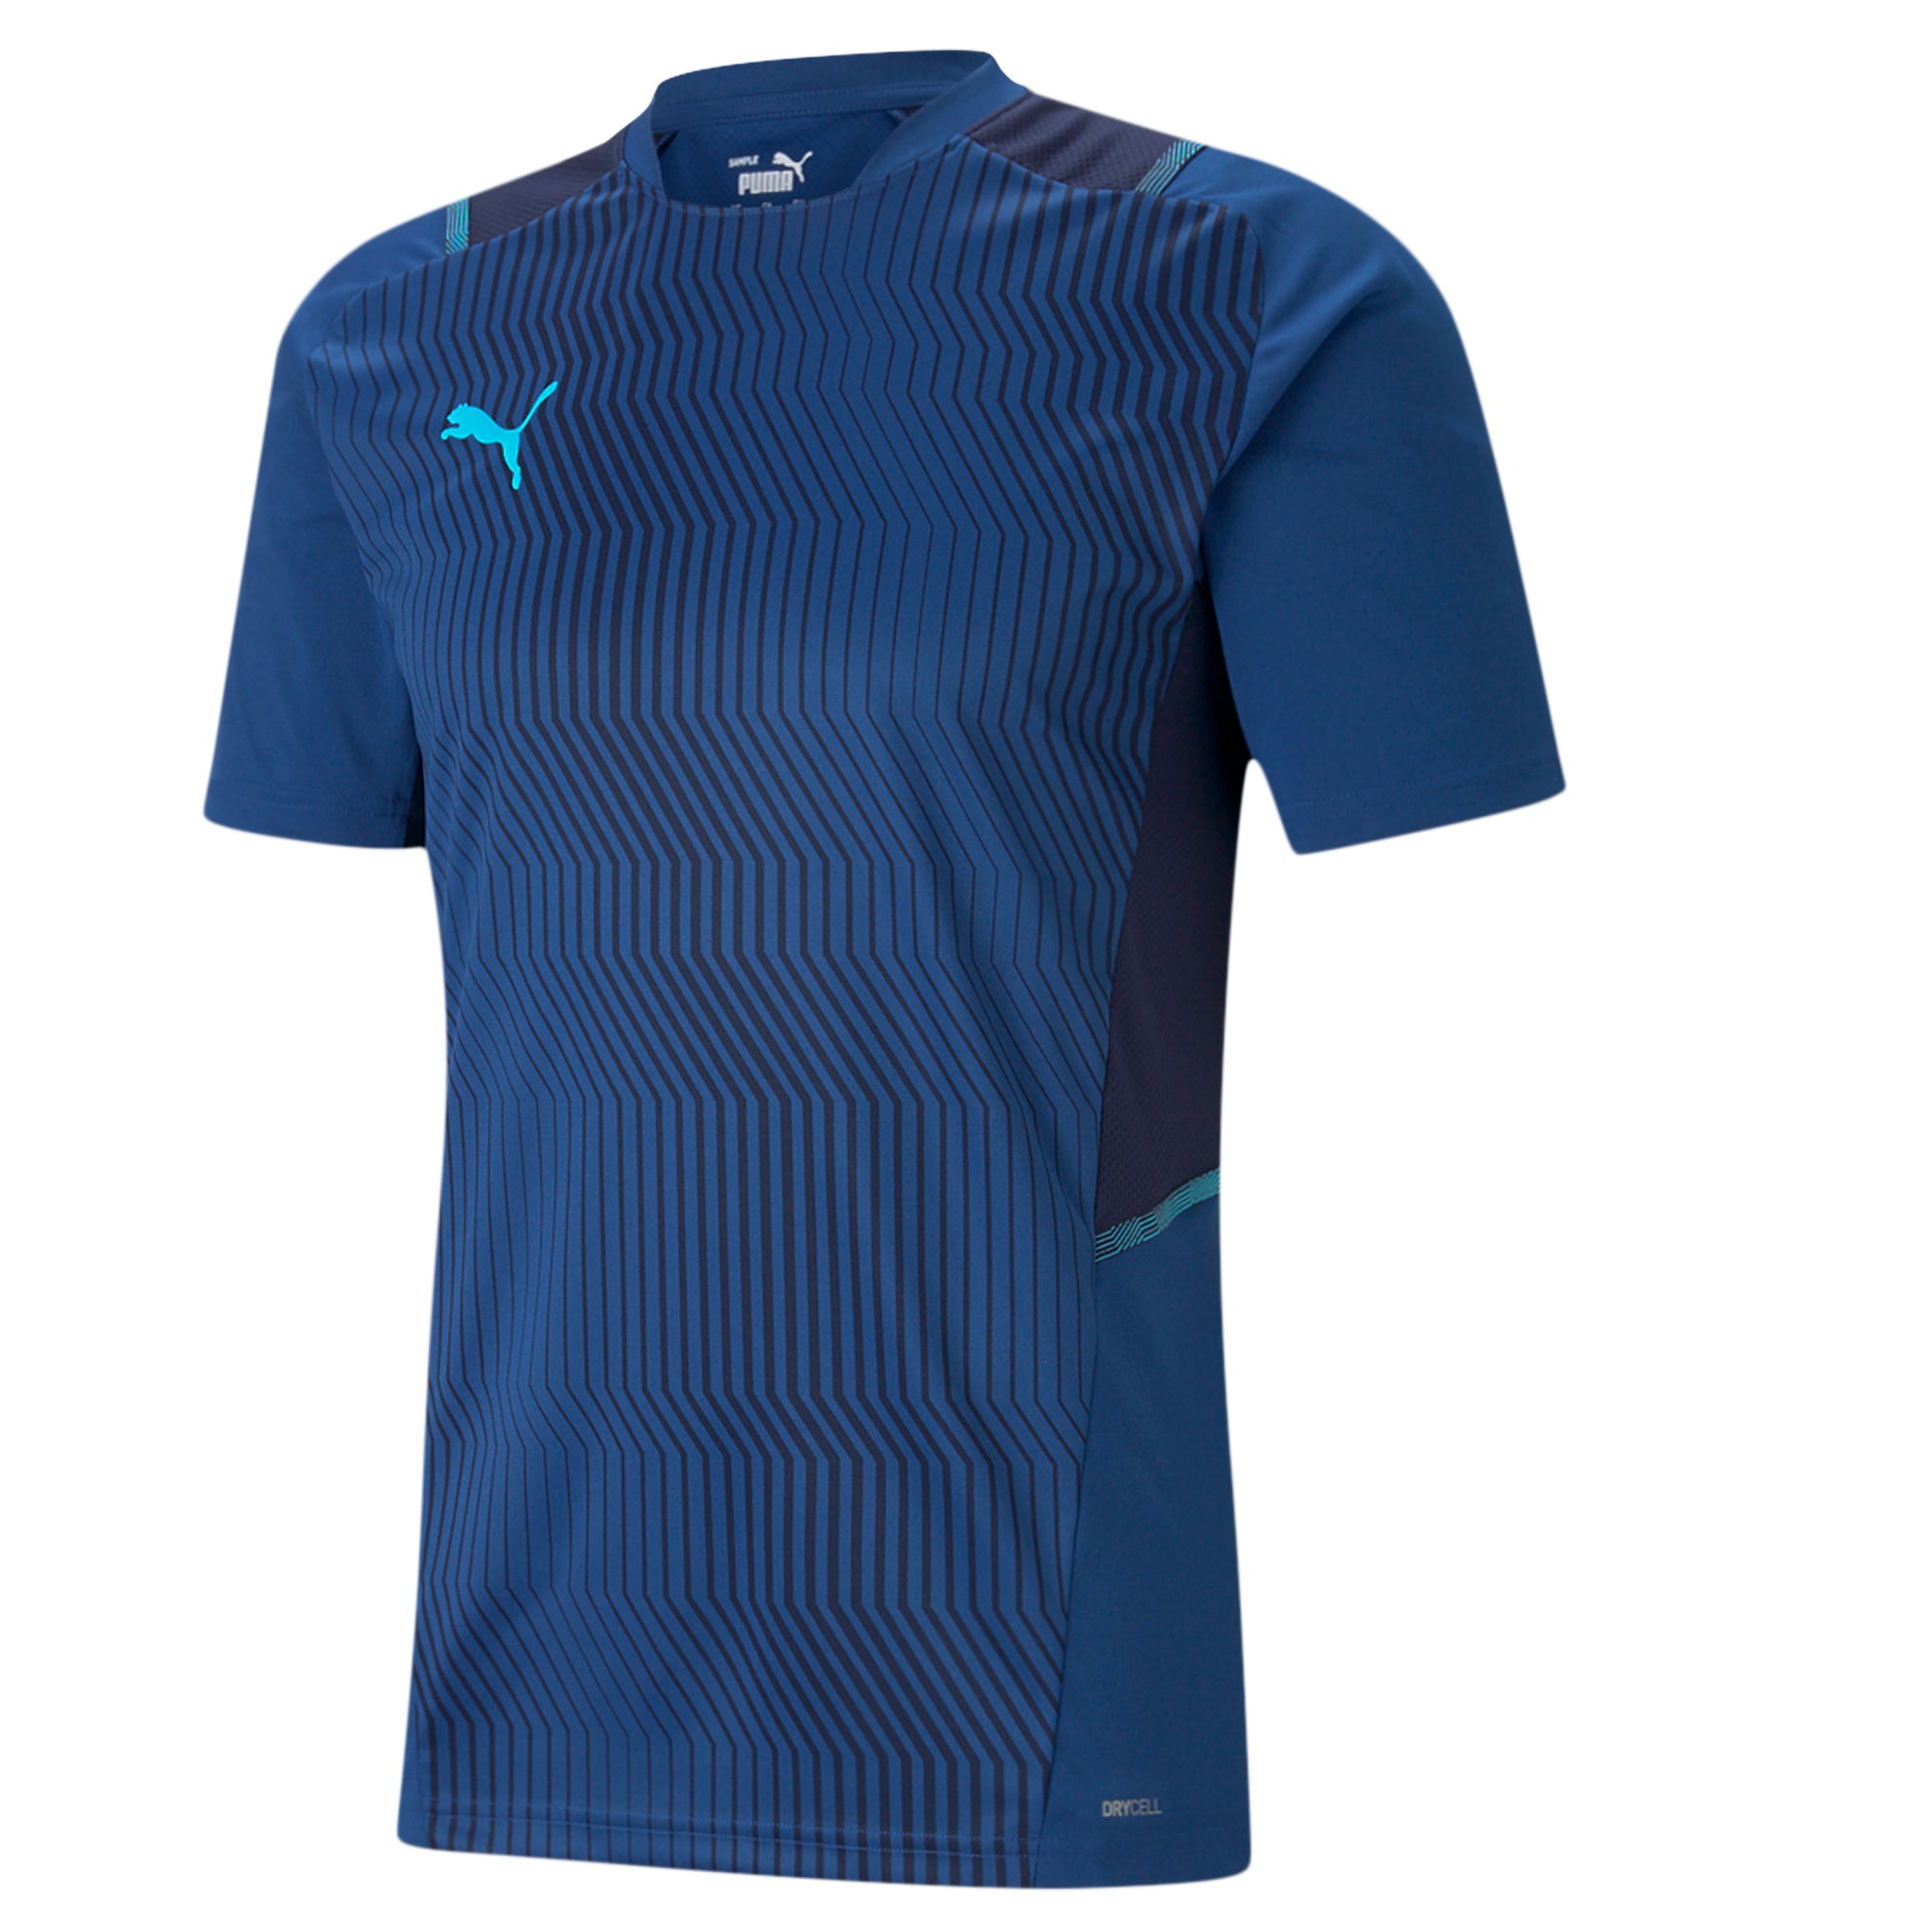 Puma Team Cup Graphic Jersey - Limoges